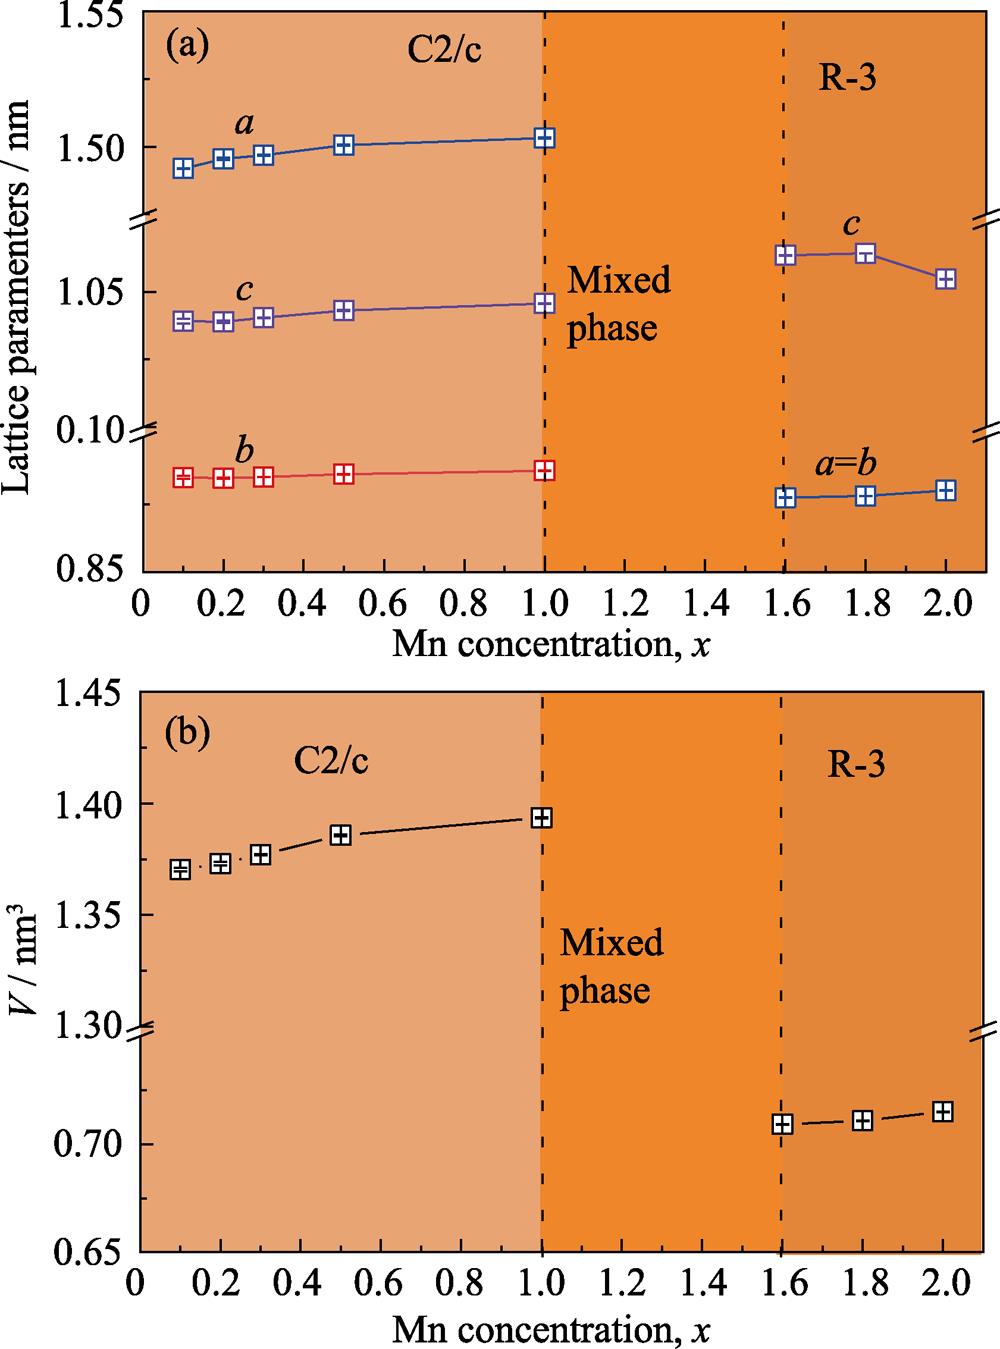 Lattice parameters a, b and c [nm] (a), and V [nm3] (b) obtained from Zn3-xMnxTeO6 (0<x≤2.0) solid solutions by XRD measurements at room temperature